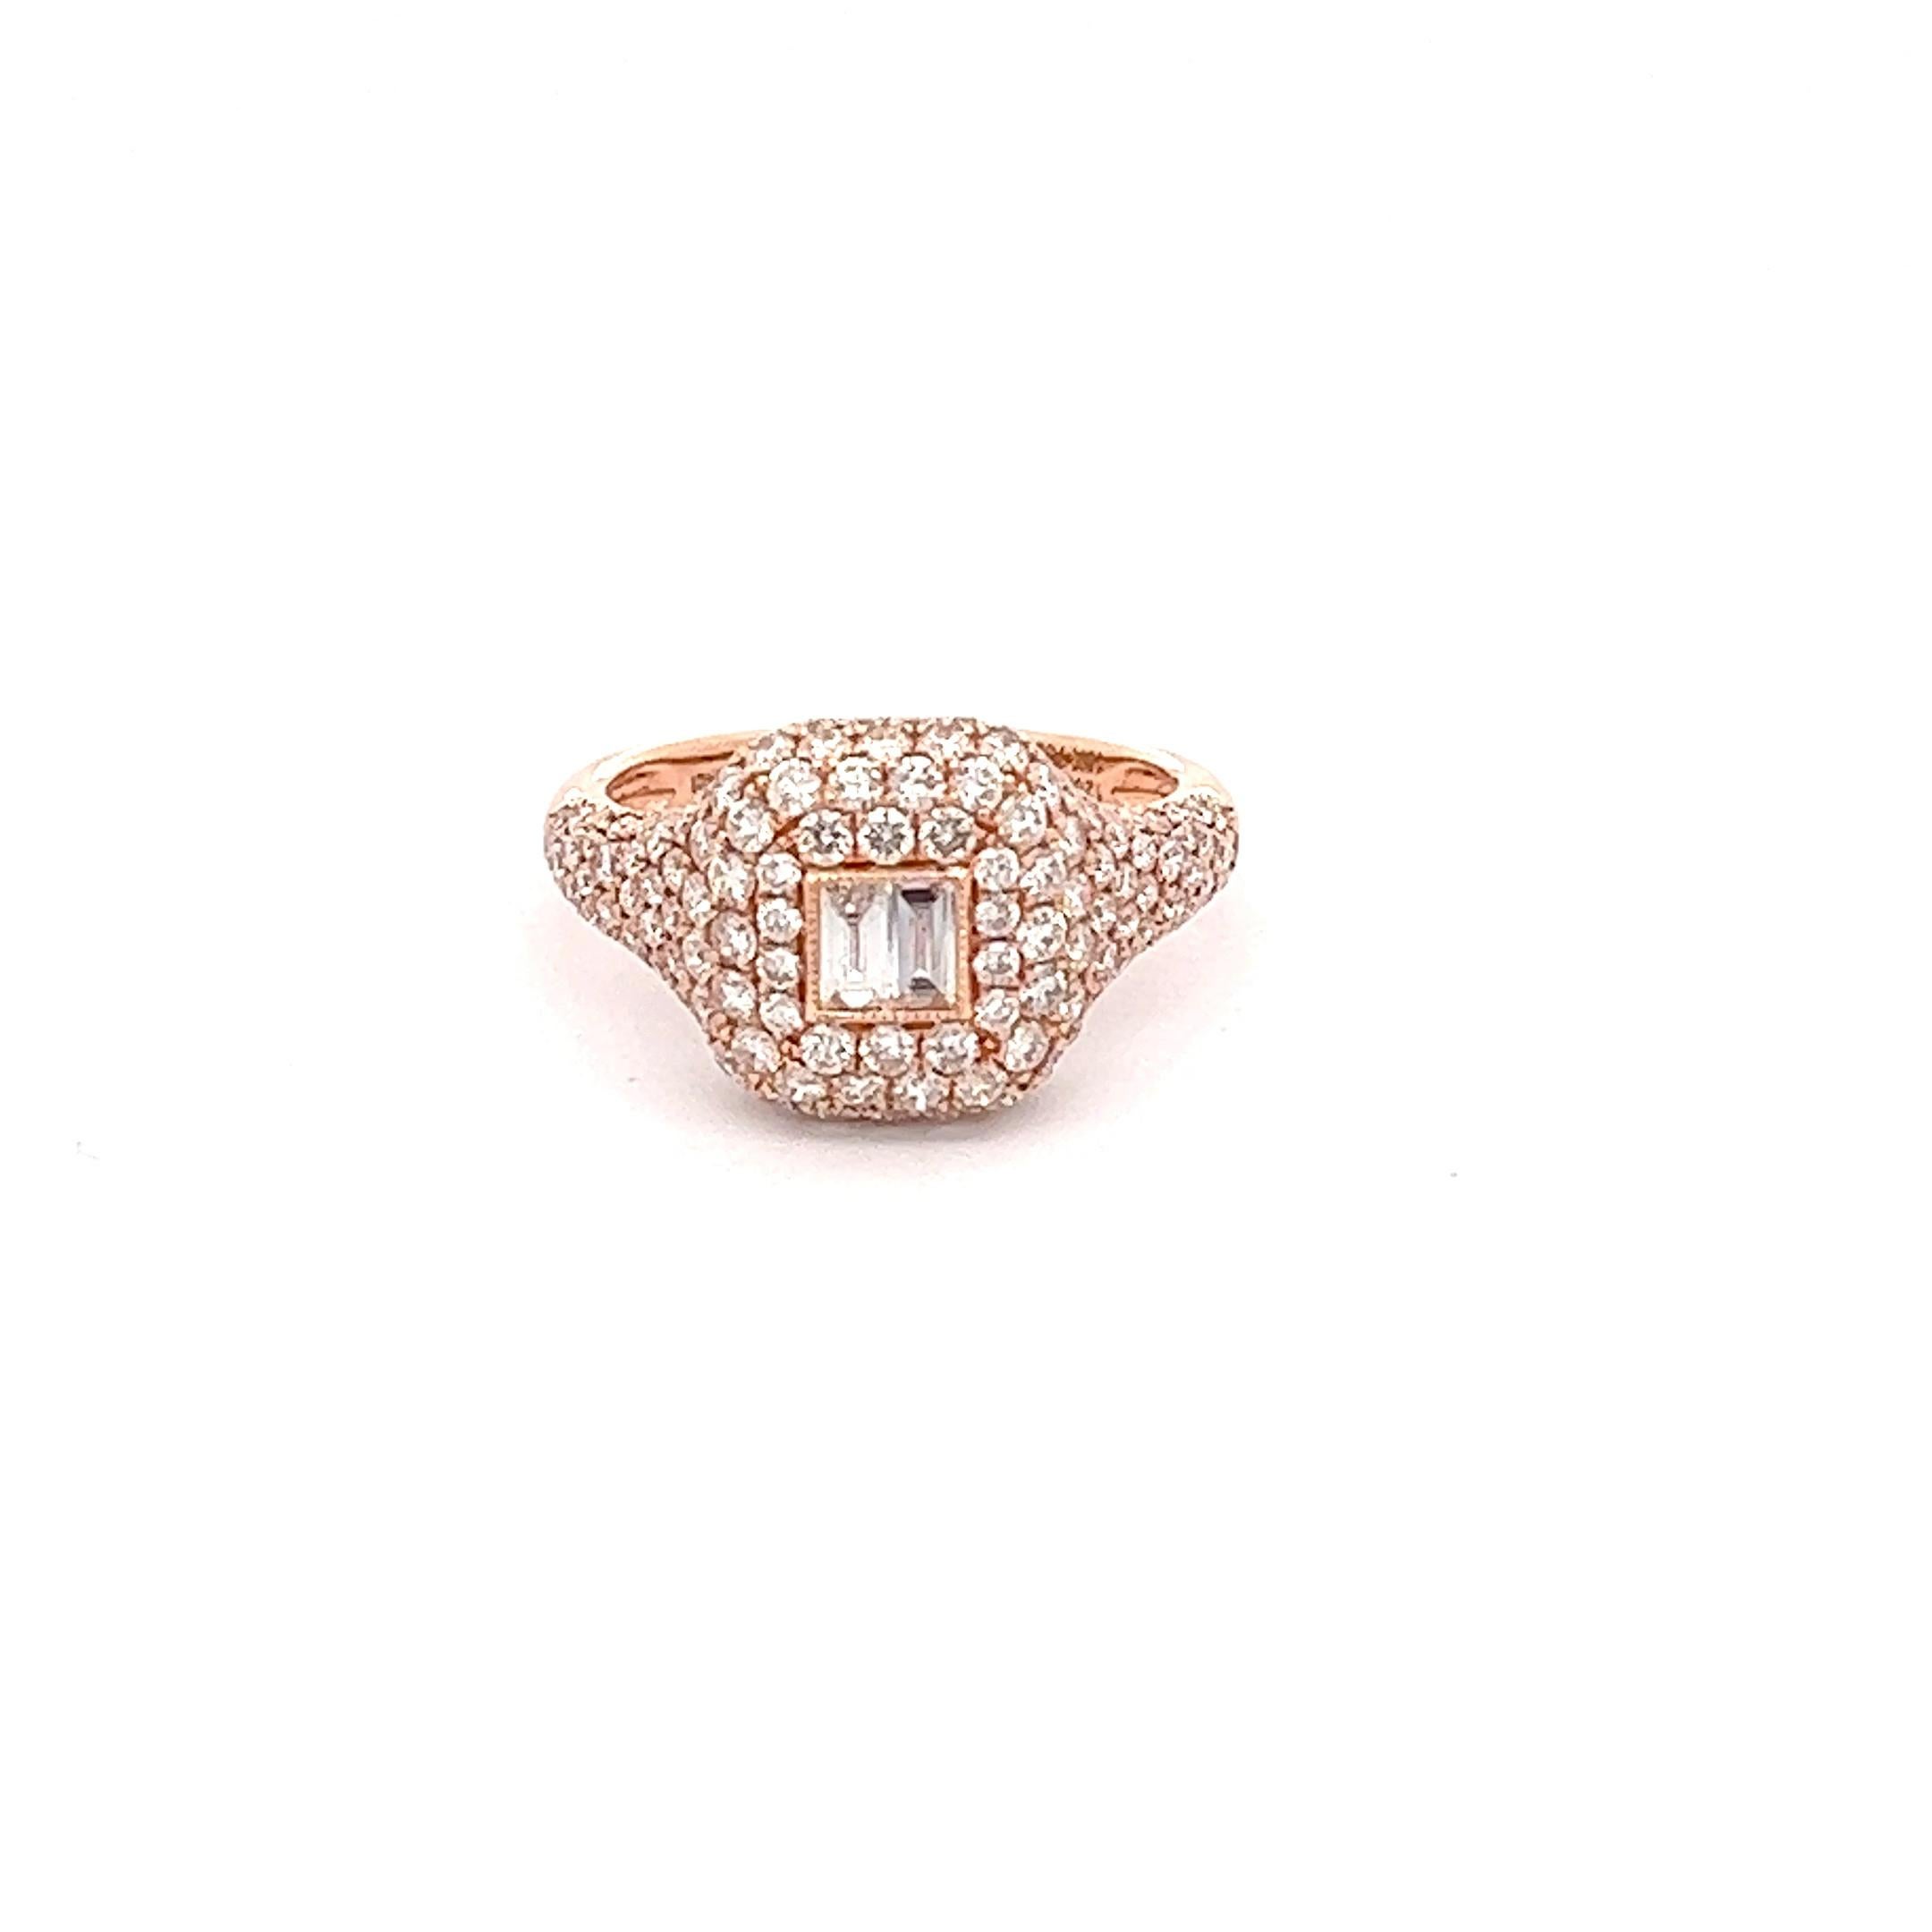 Beautiful 18K Rose Gold Baguette Diamond Lady's Ring perfect for everyday wear or special occasions.

18KR 3.90Grams
152RD 1.51CT
2BD 0.13CT